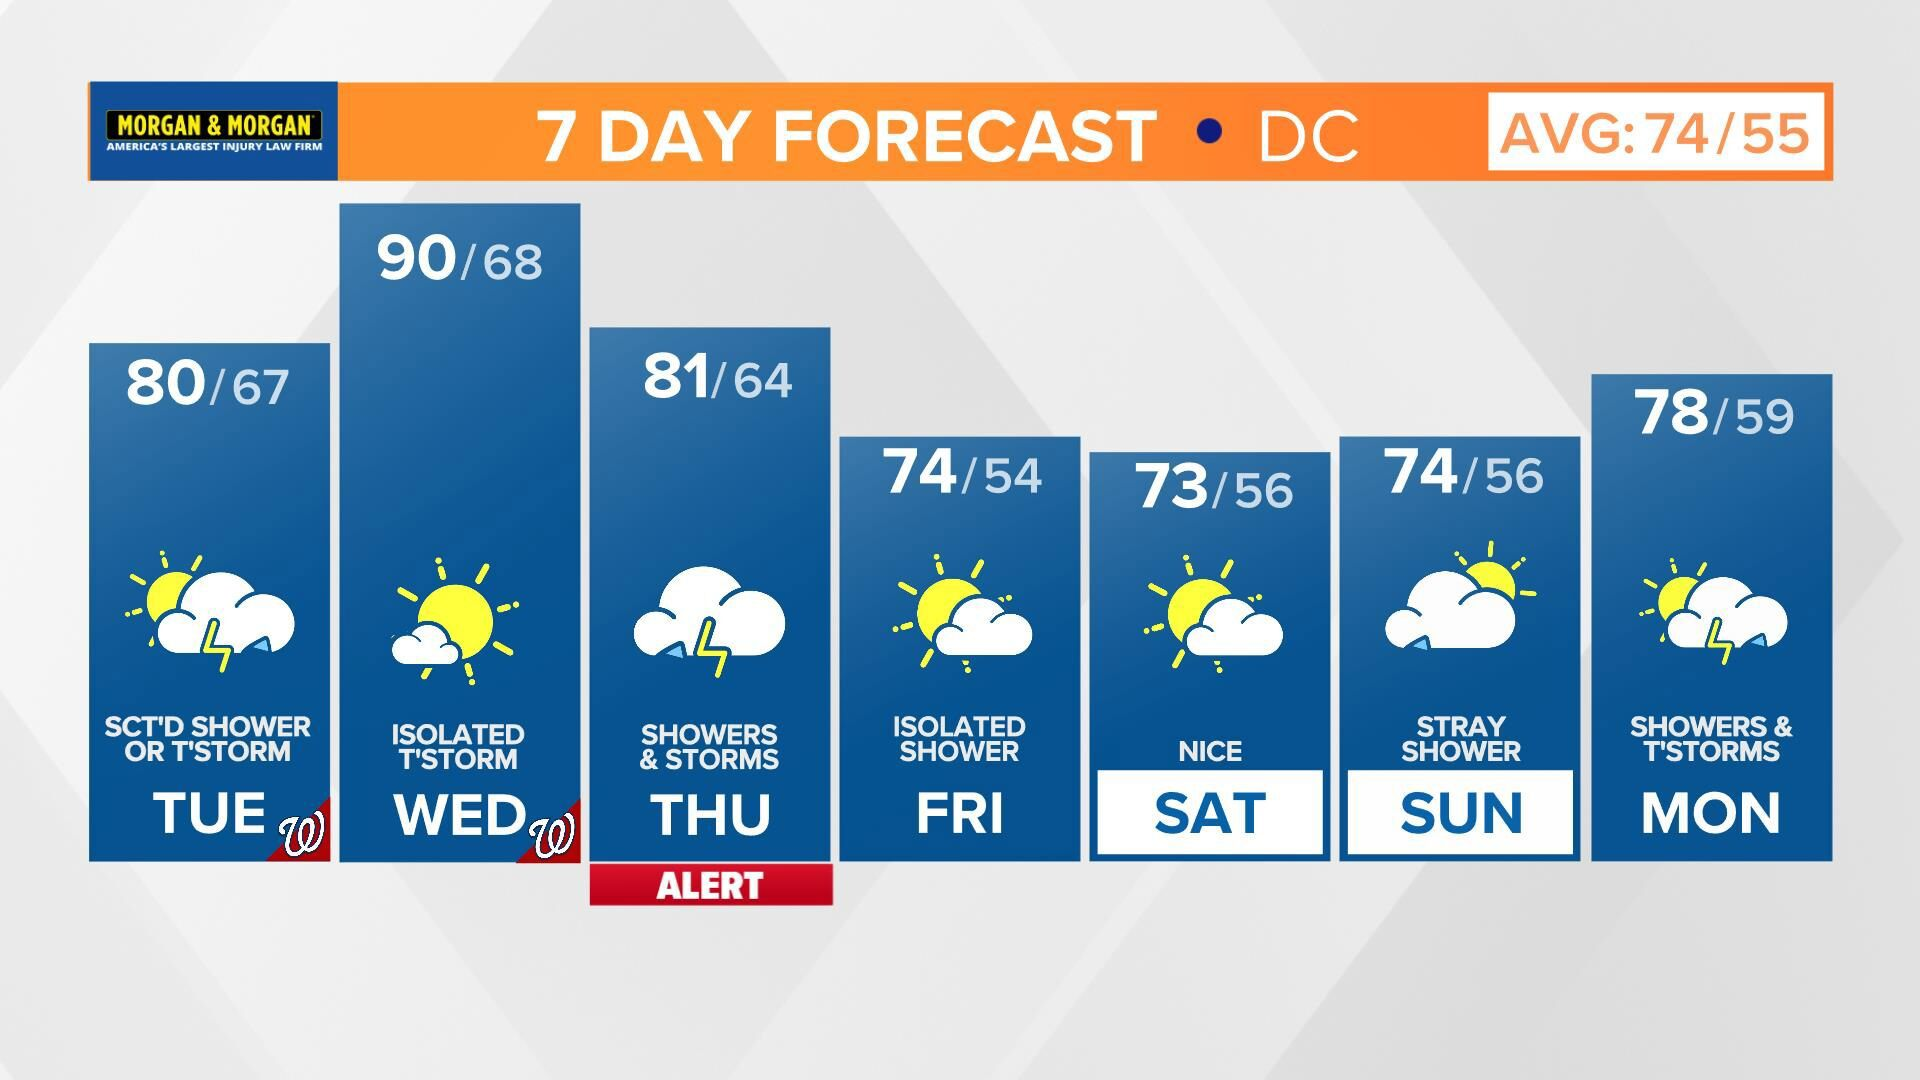 A summer-like week ahead with warm temperatures and the chance for showers and/or storms every day through Friday.